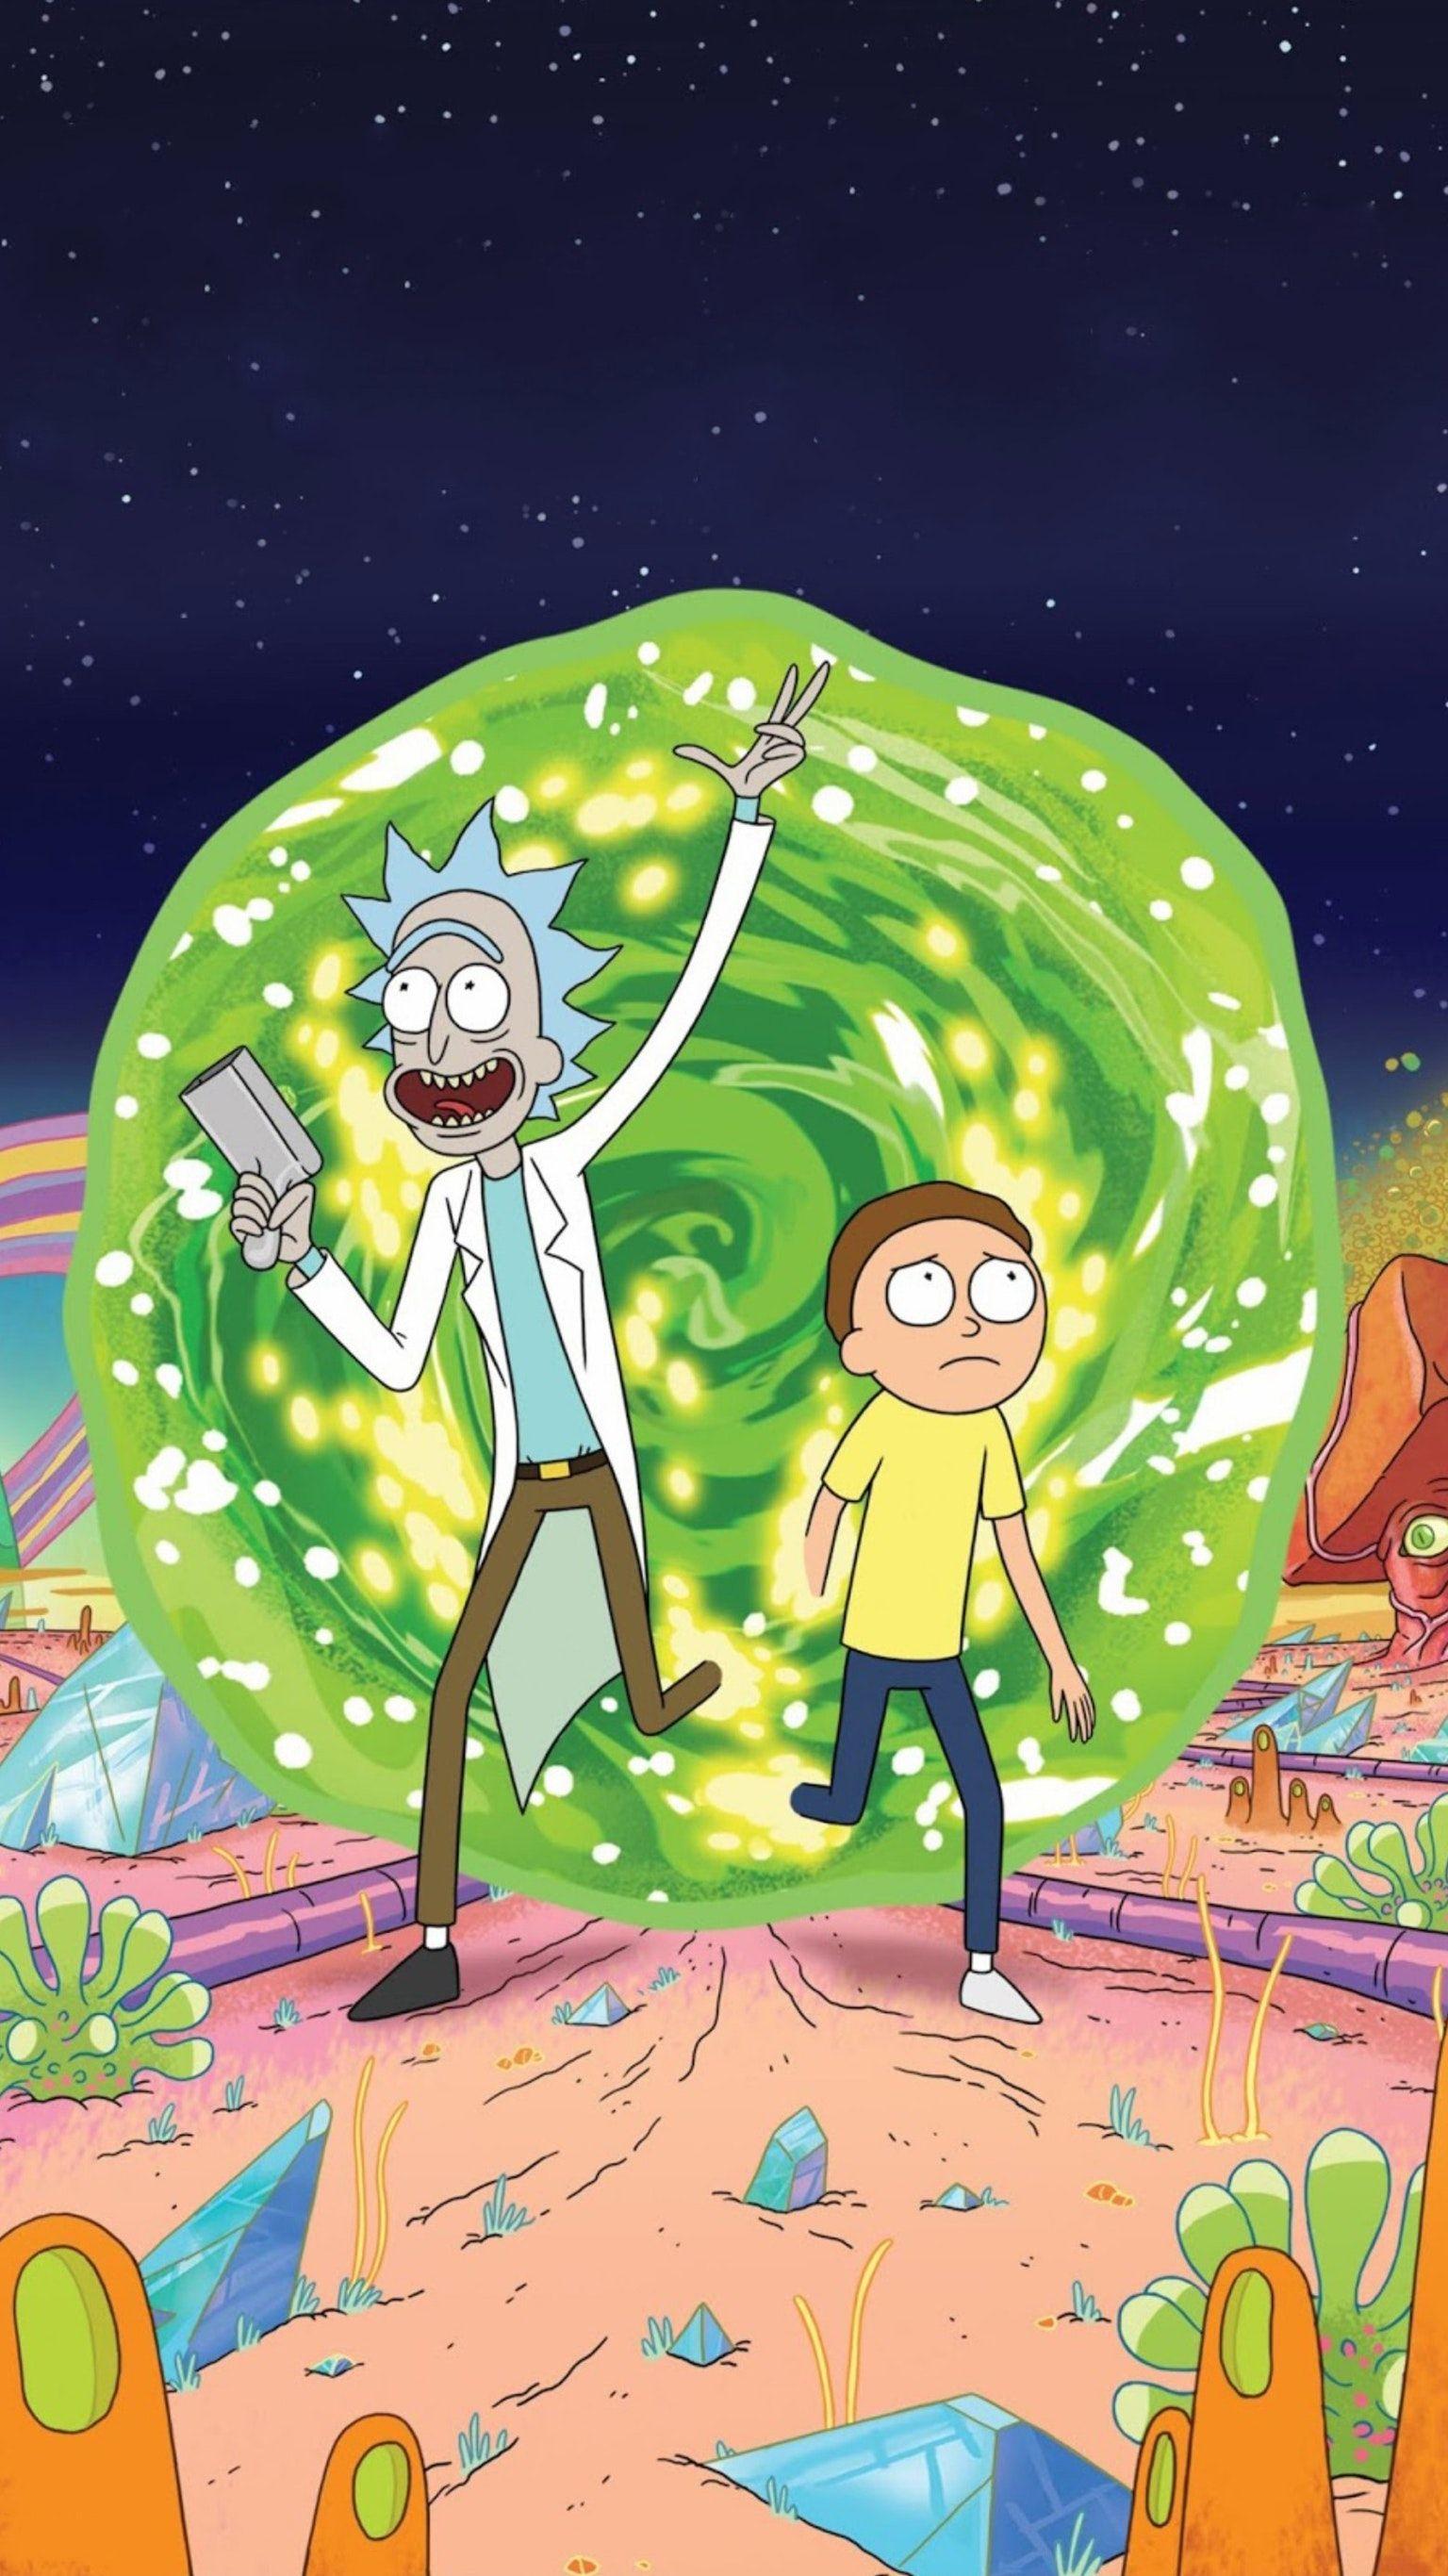 Adult Swim Announces Rick and Morty: The Anime - Marooners' Rock